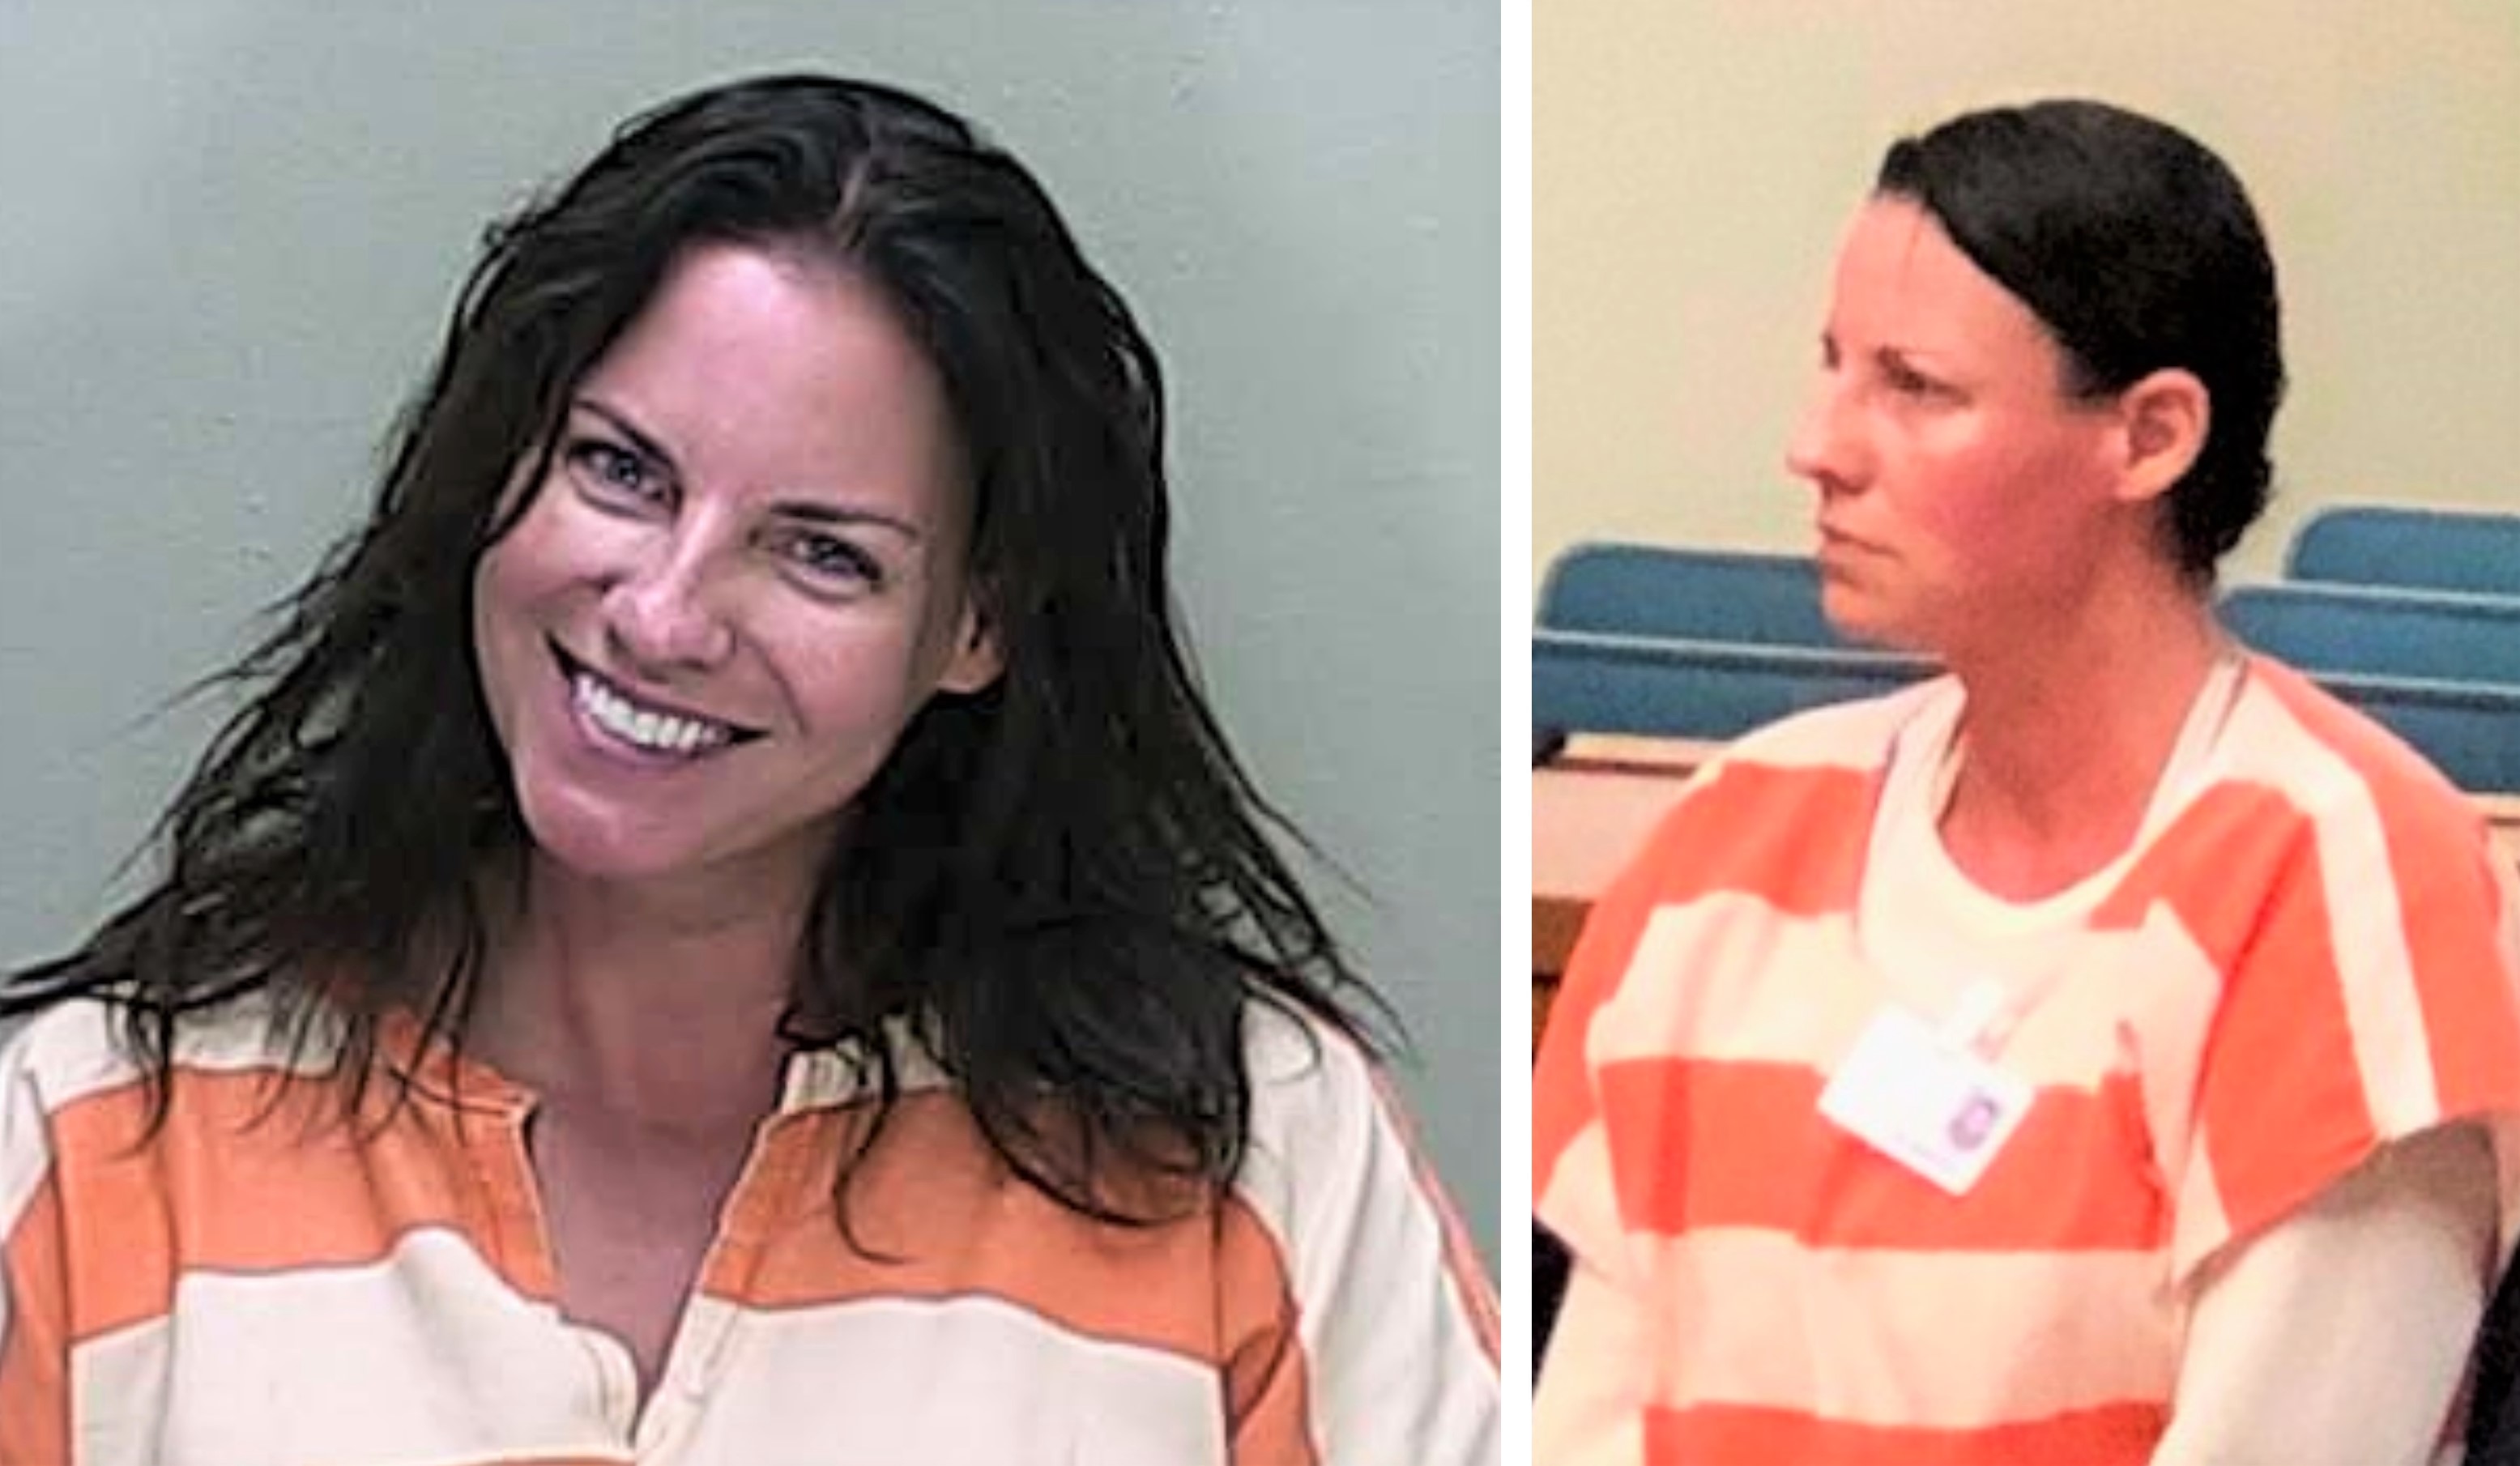 Ocala Woman Notorious For Grinning Mugshot Takes Plea Deal In Fatal Dui Crash Ocala